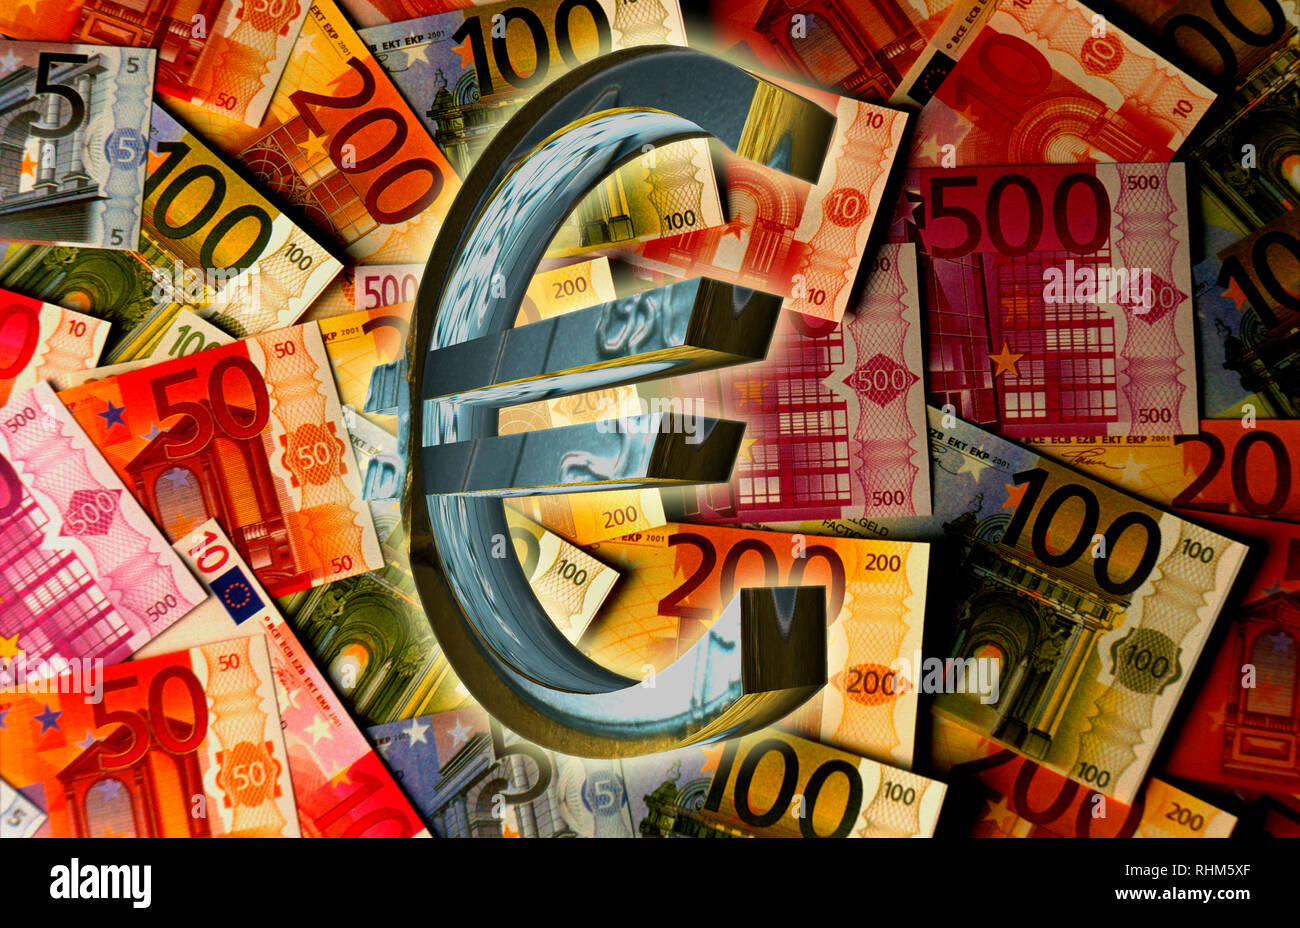 Euro sign in front of euro banknotes, illustration Stock Photo